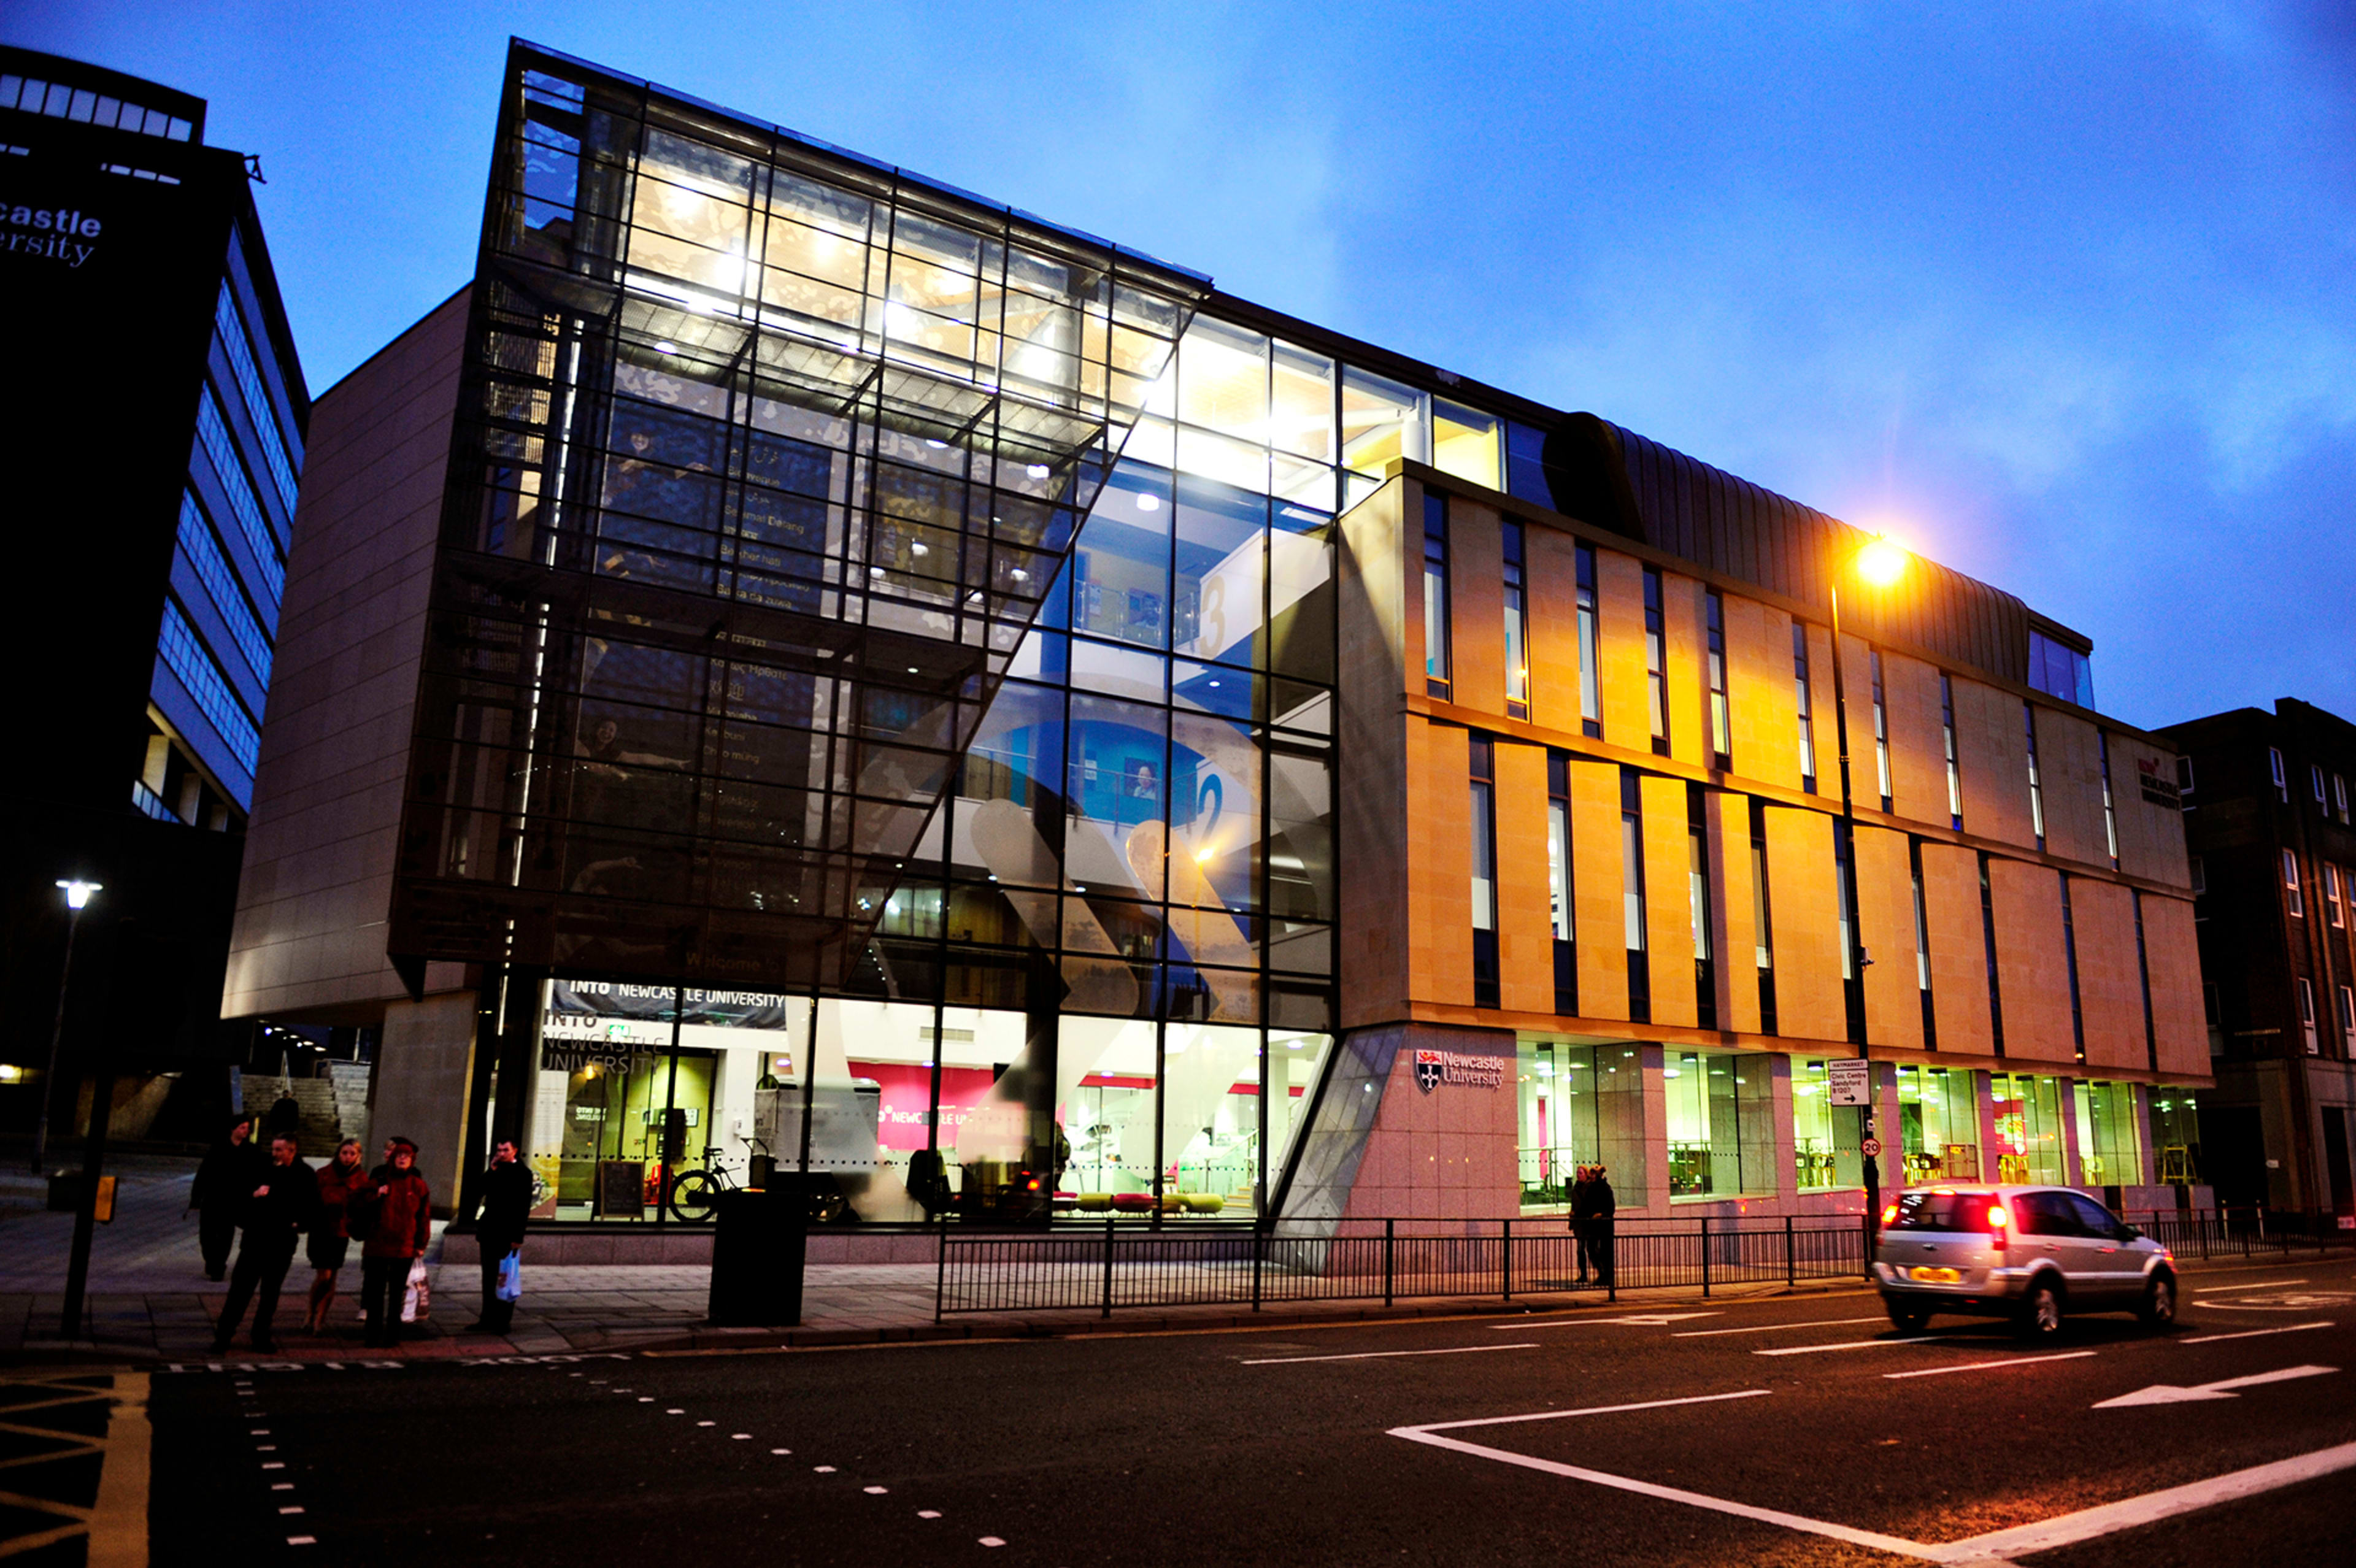 External evening view of the INTO center at Newcastle University